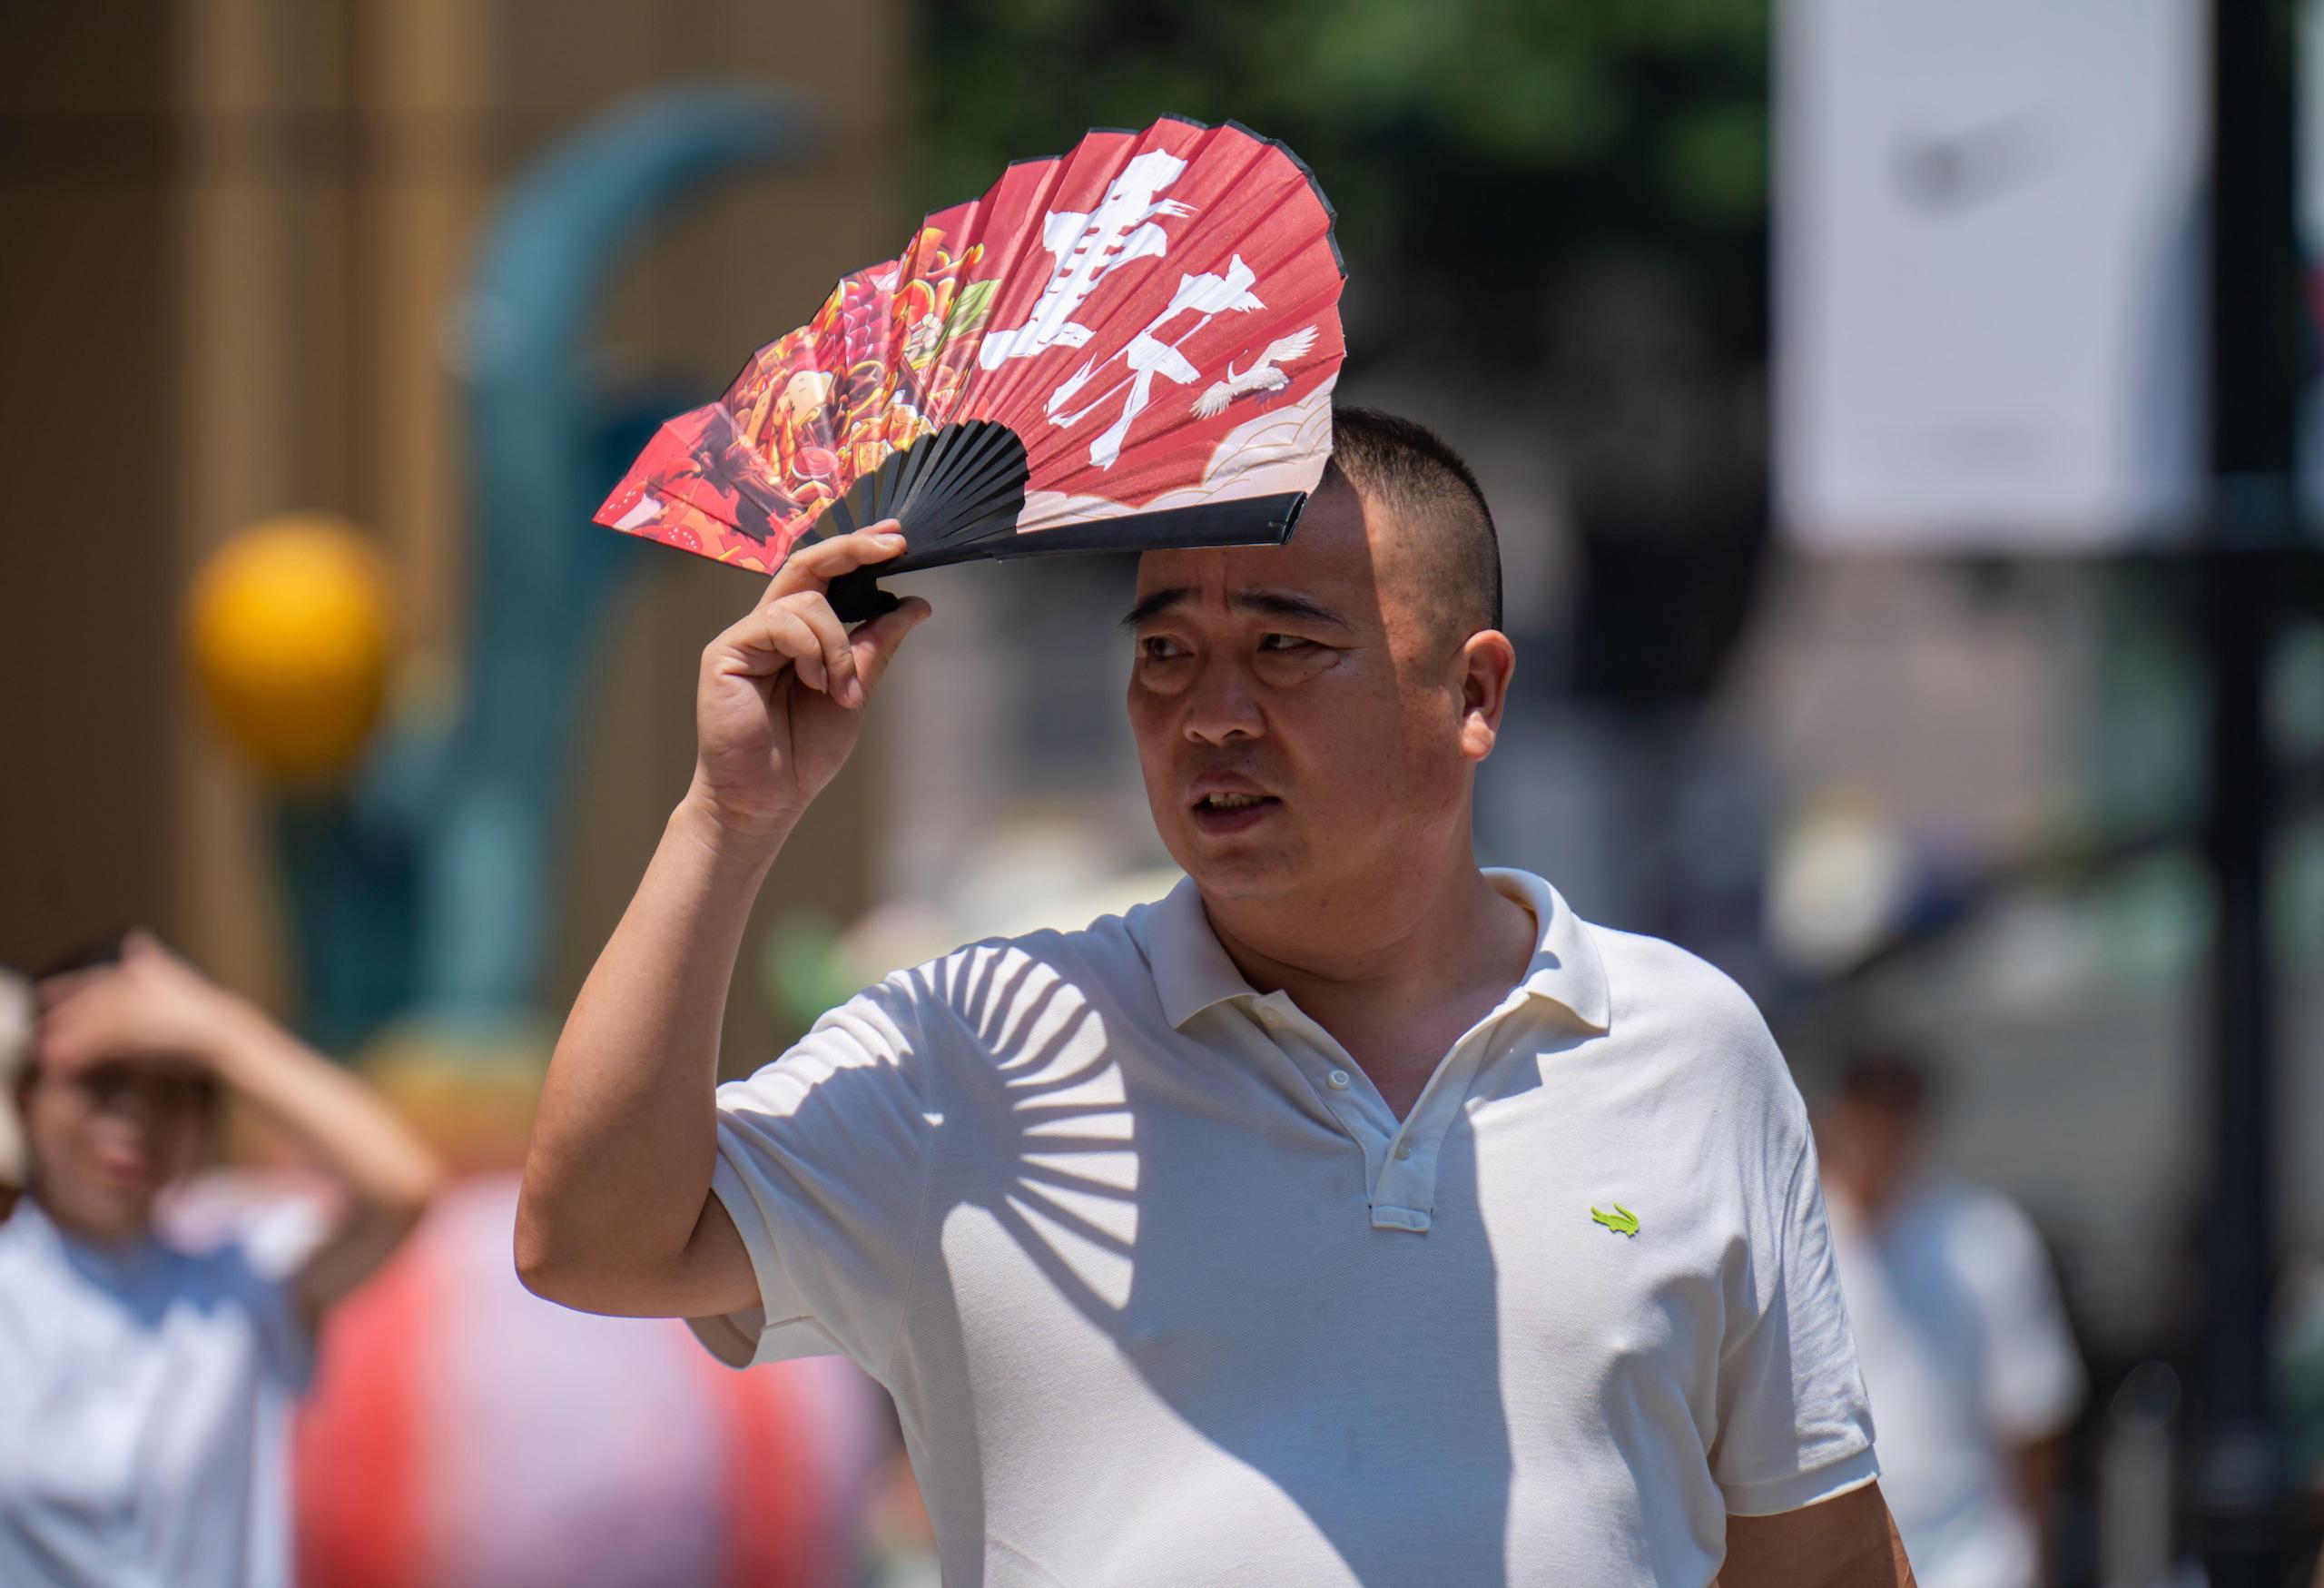 <p>A tourist in the Chinese city of Chongqing struggles in abnormally high temperatures in August this year. 2023 was the hottest year in recorded human history. (Image: Alamy)</p>